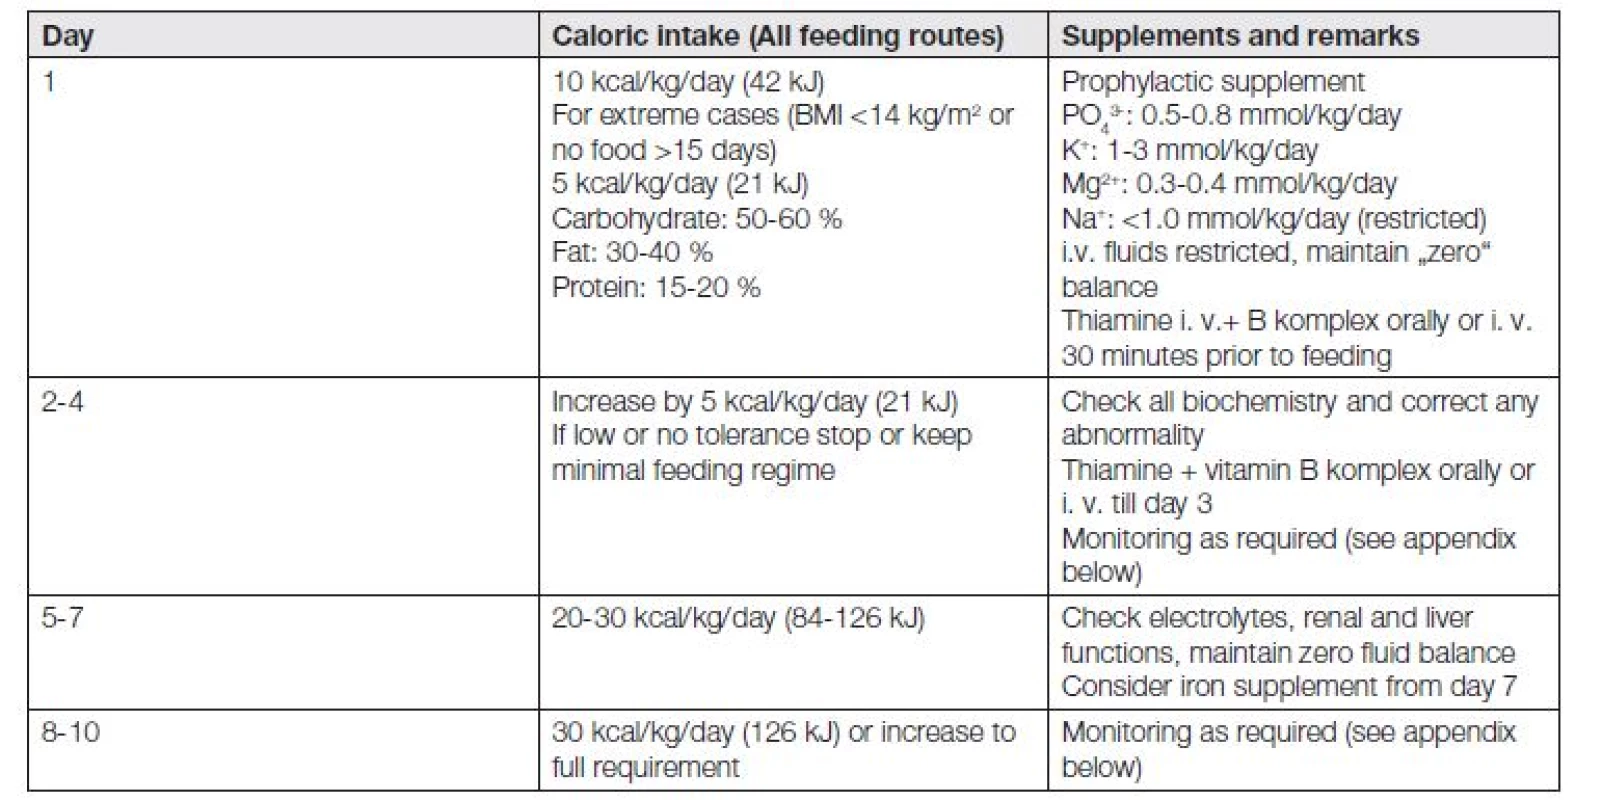 Refeeding regime for patients at risk of refeeding syndrome [28,29].